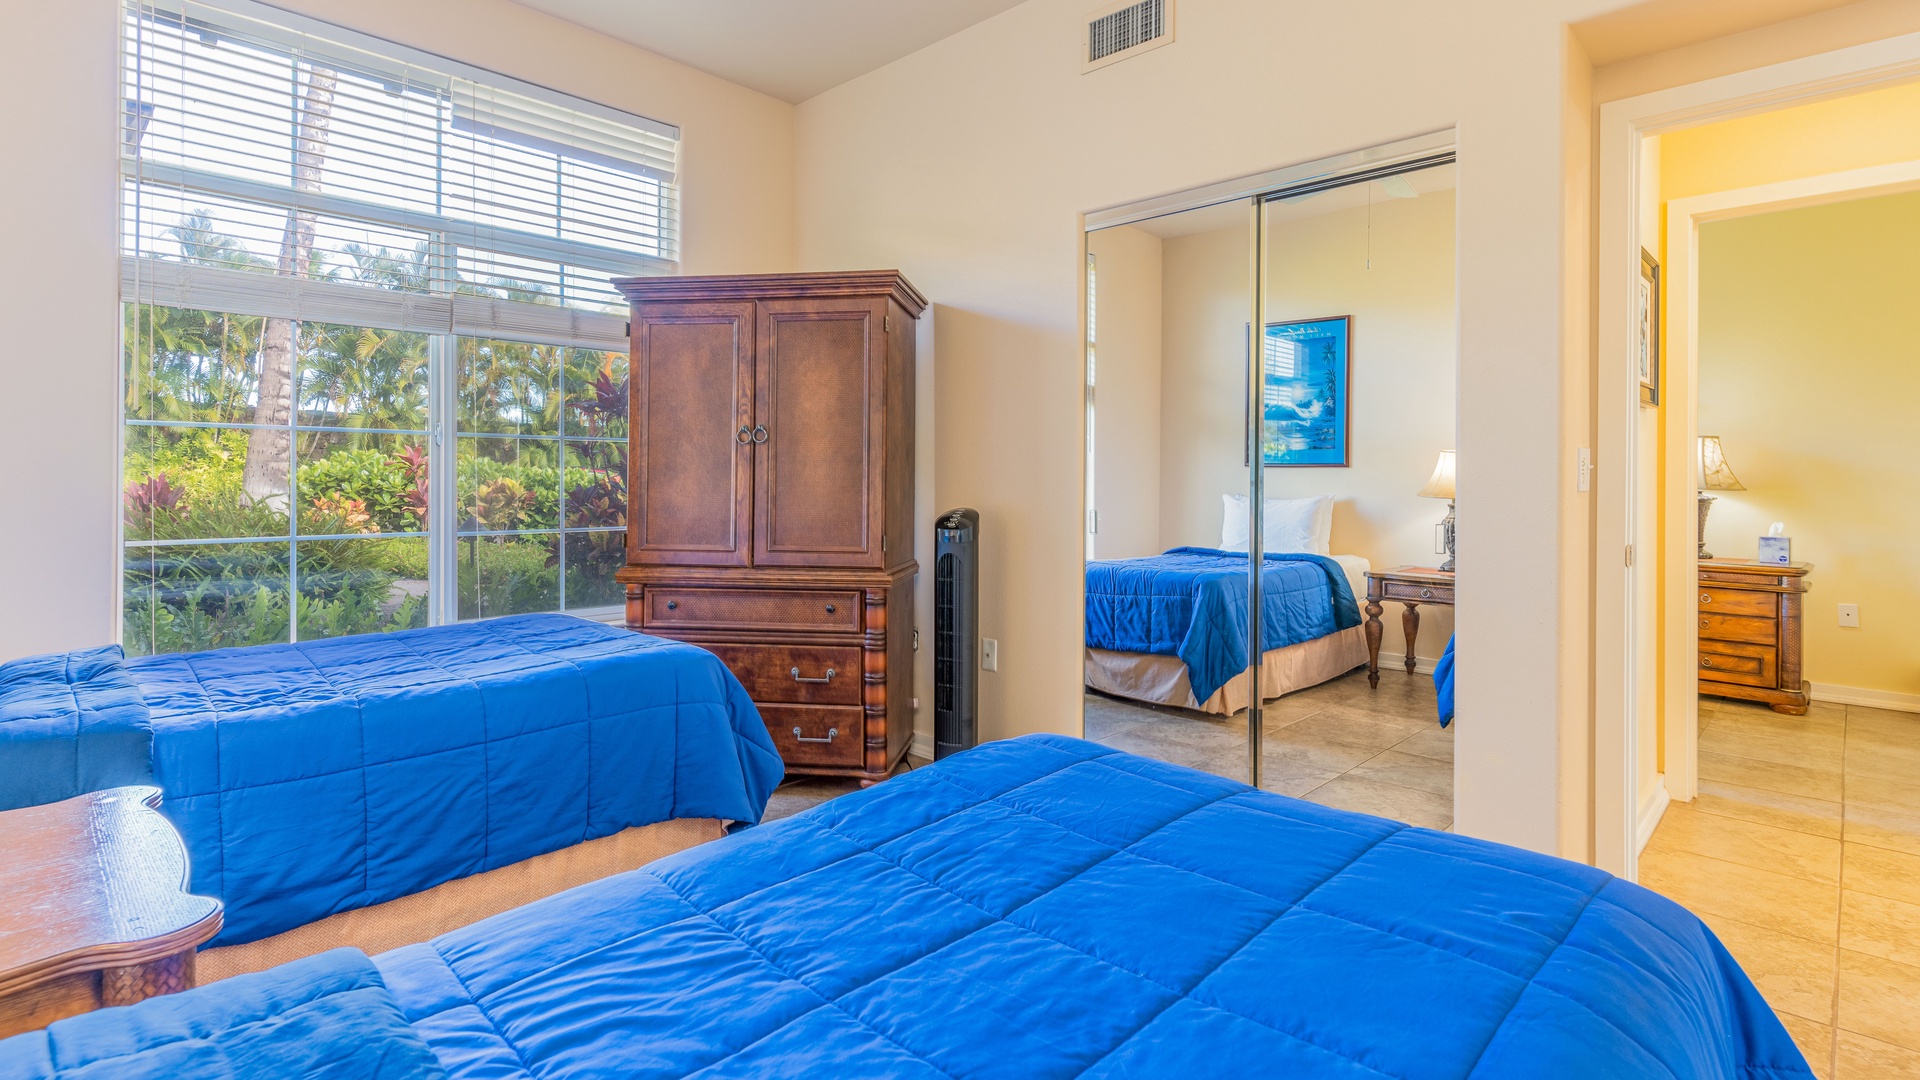 Kapolei Vacation Rentals, Kai Lani 8B - The third guest bedroom features storage and views.